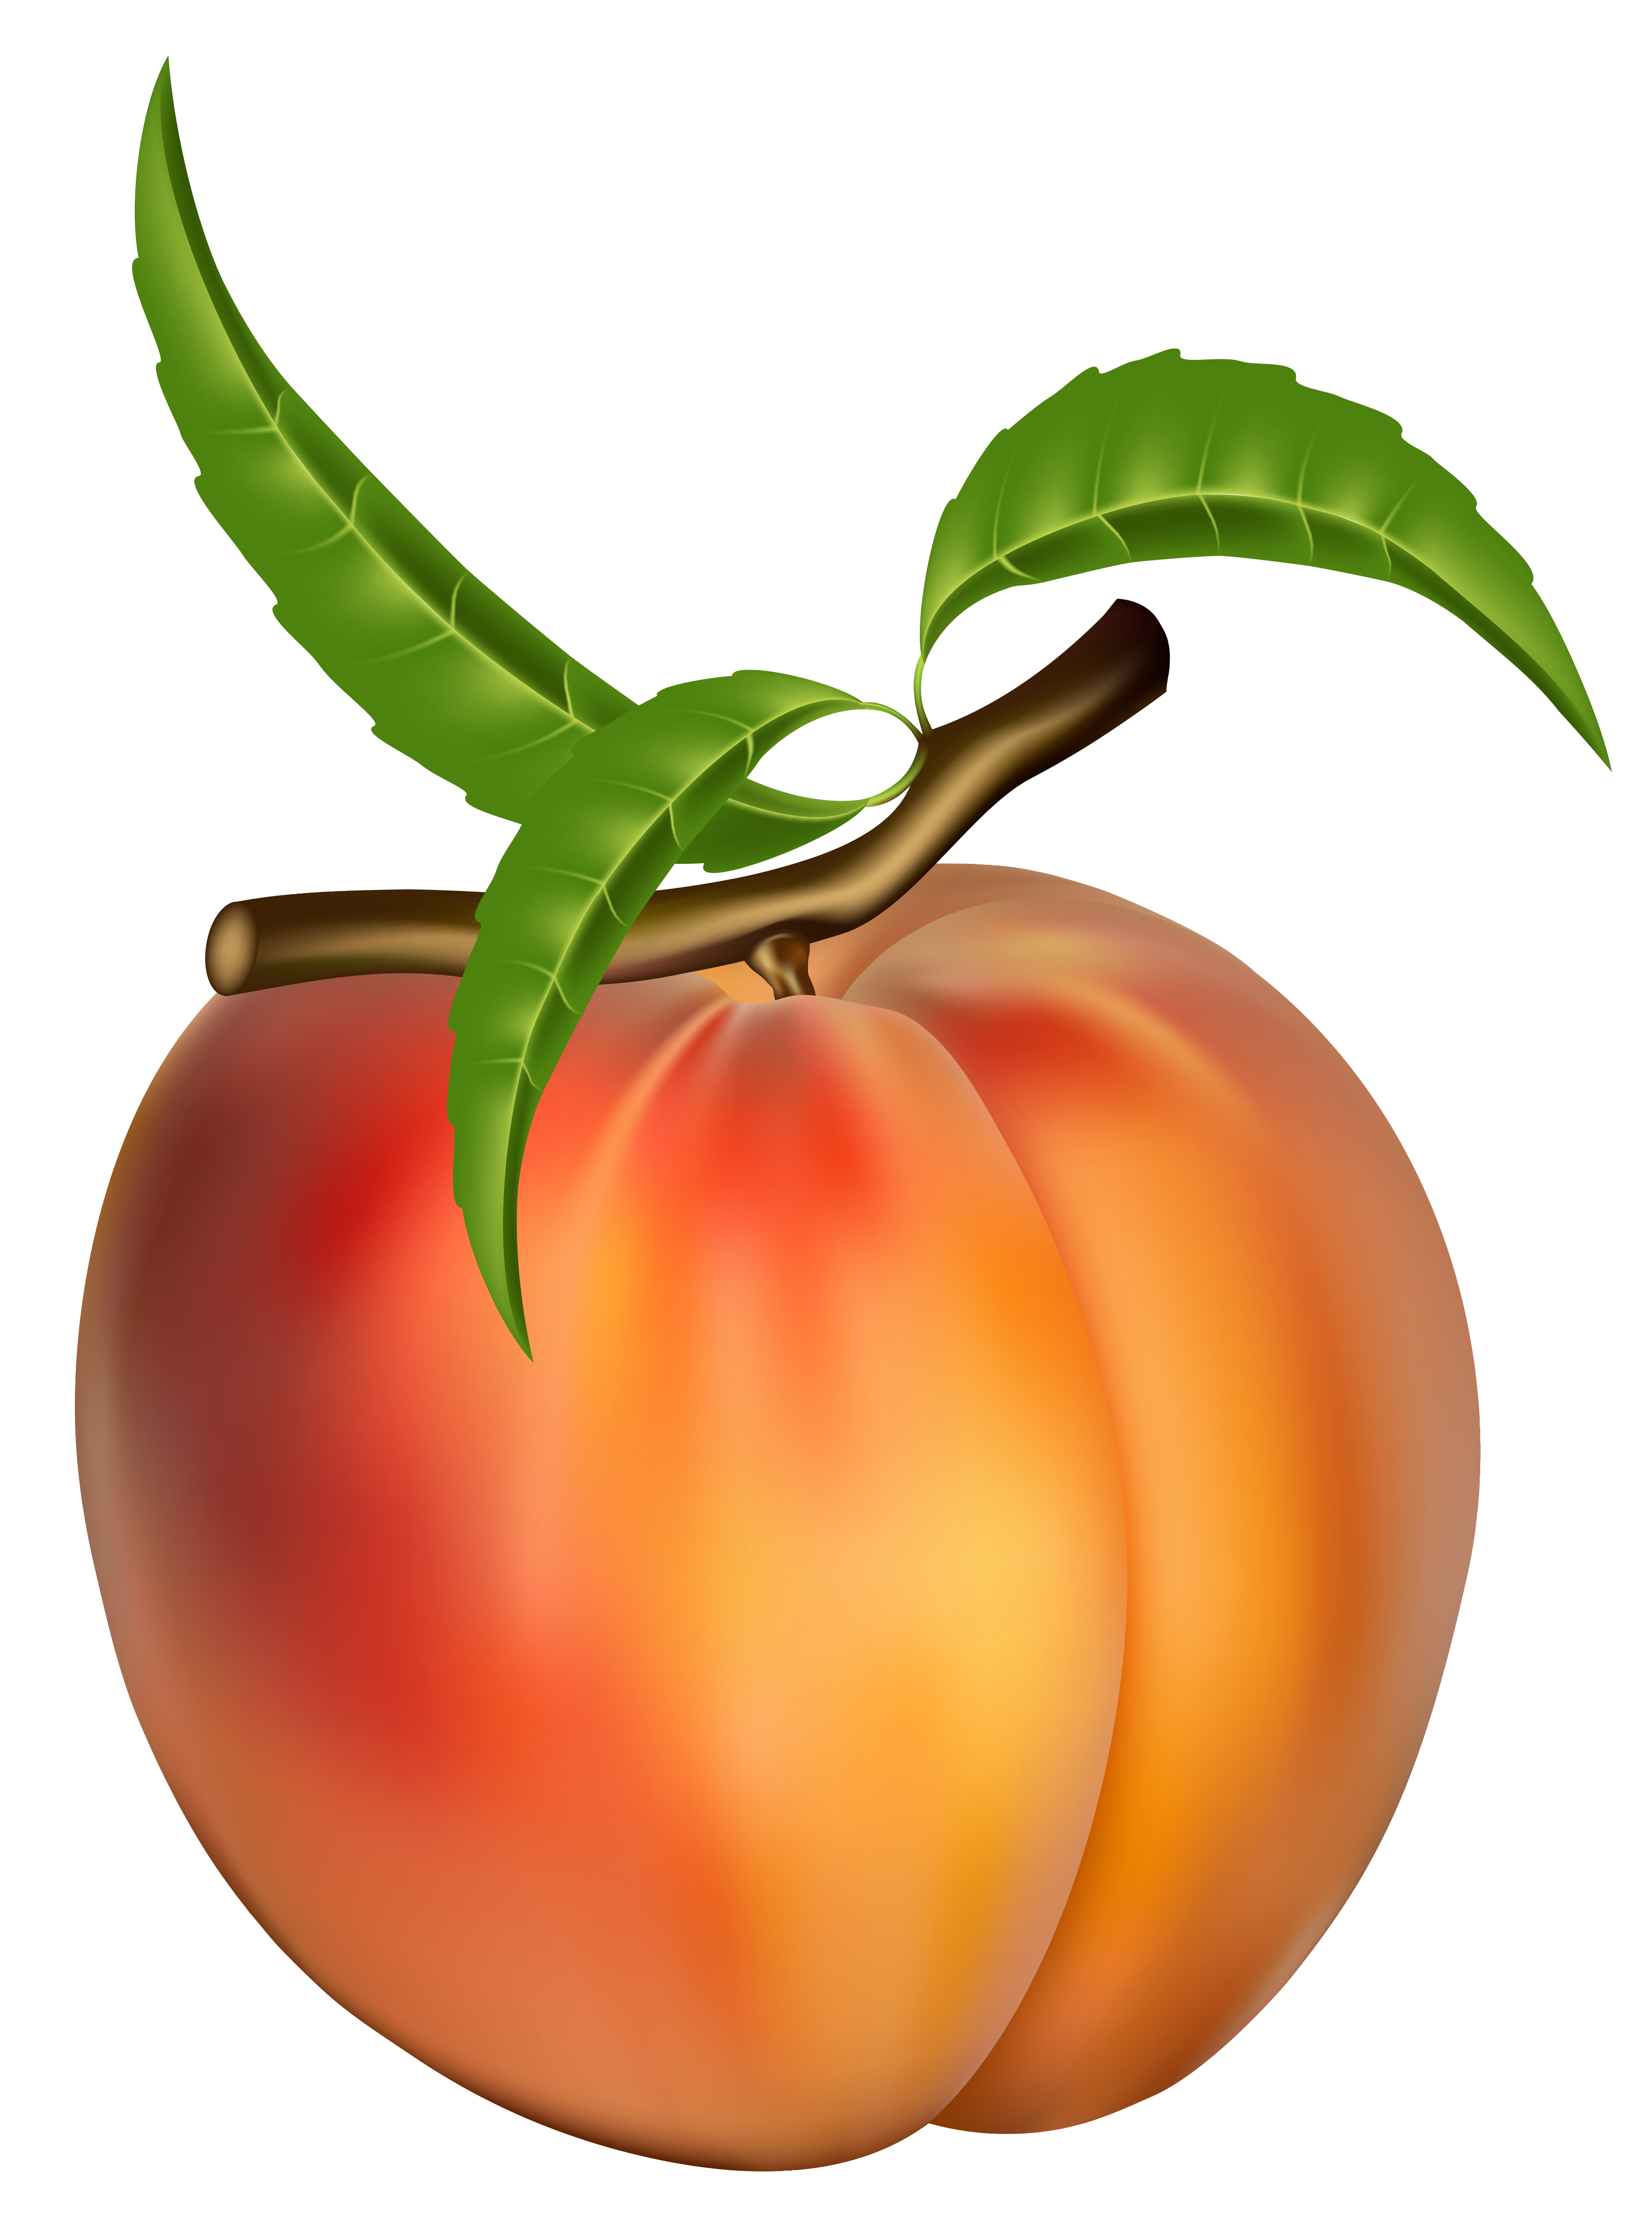 Peach Image Png Clipart